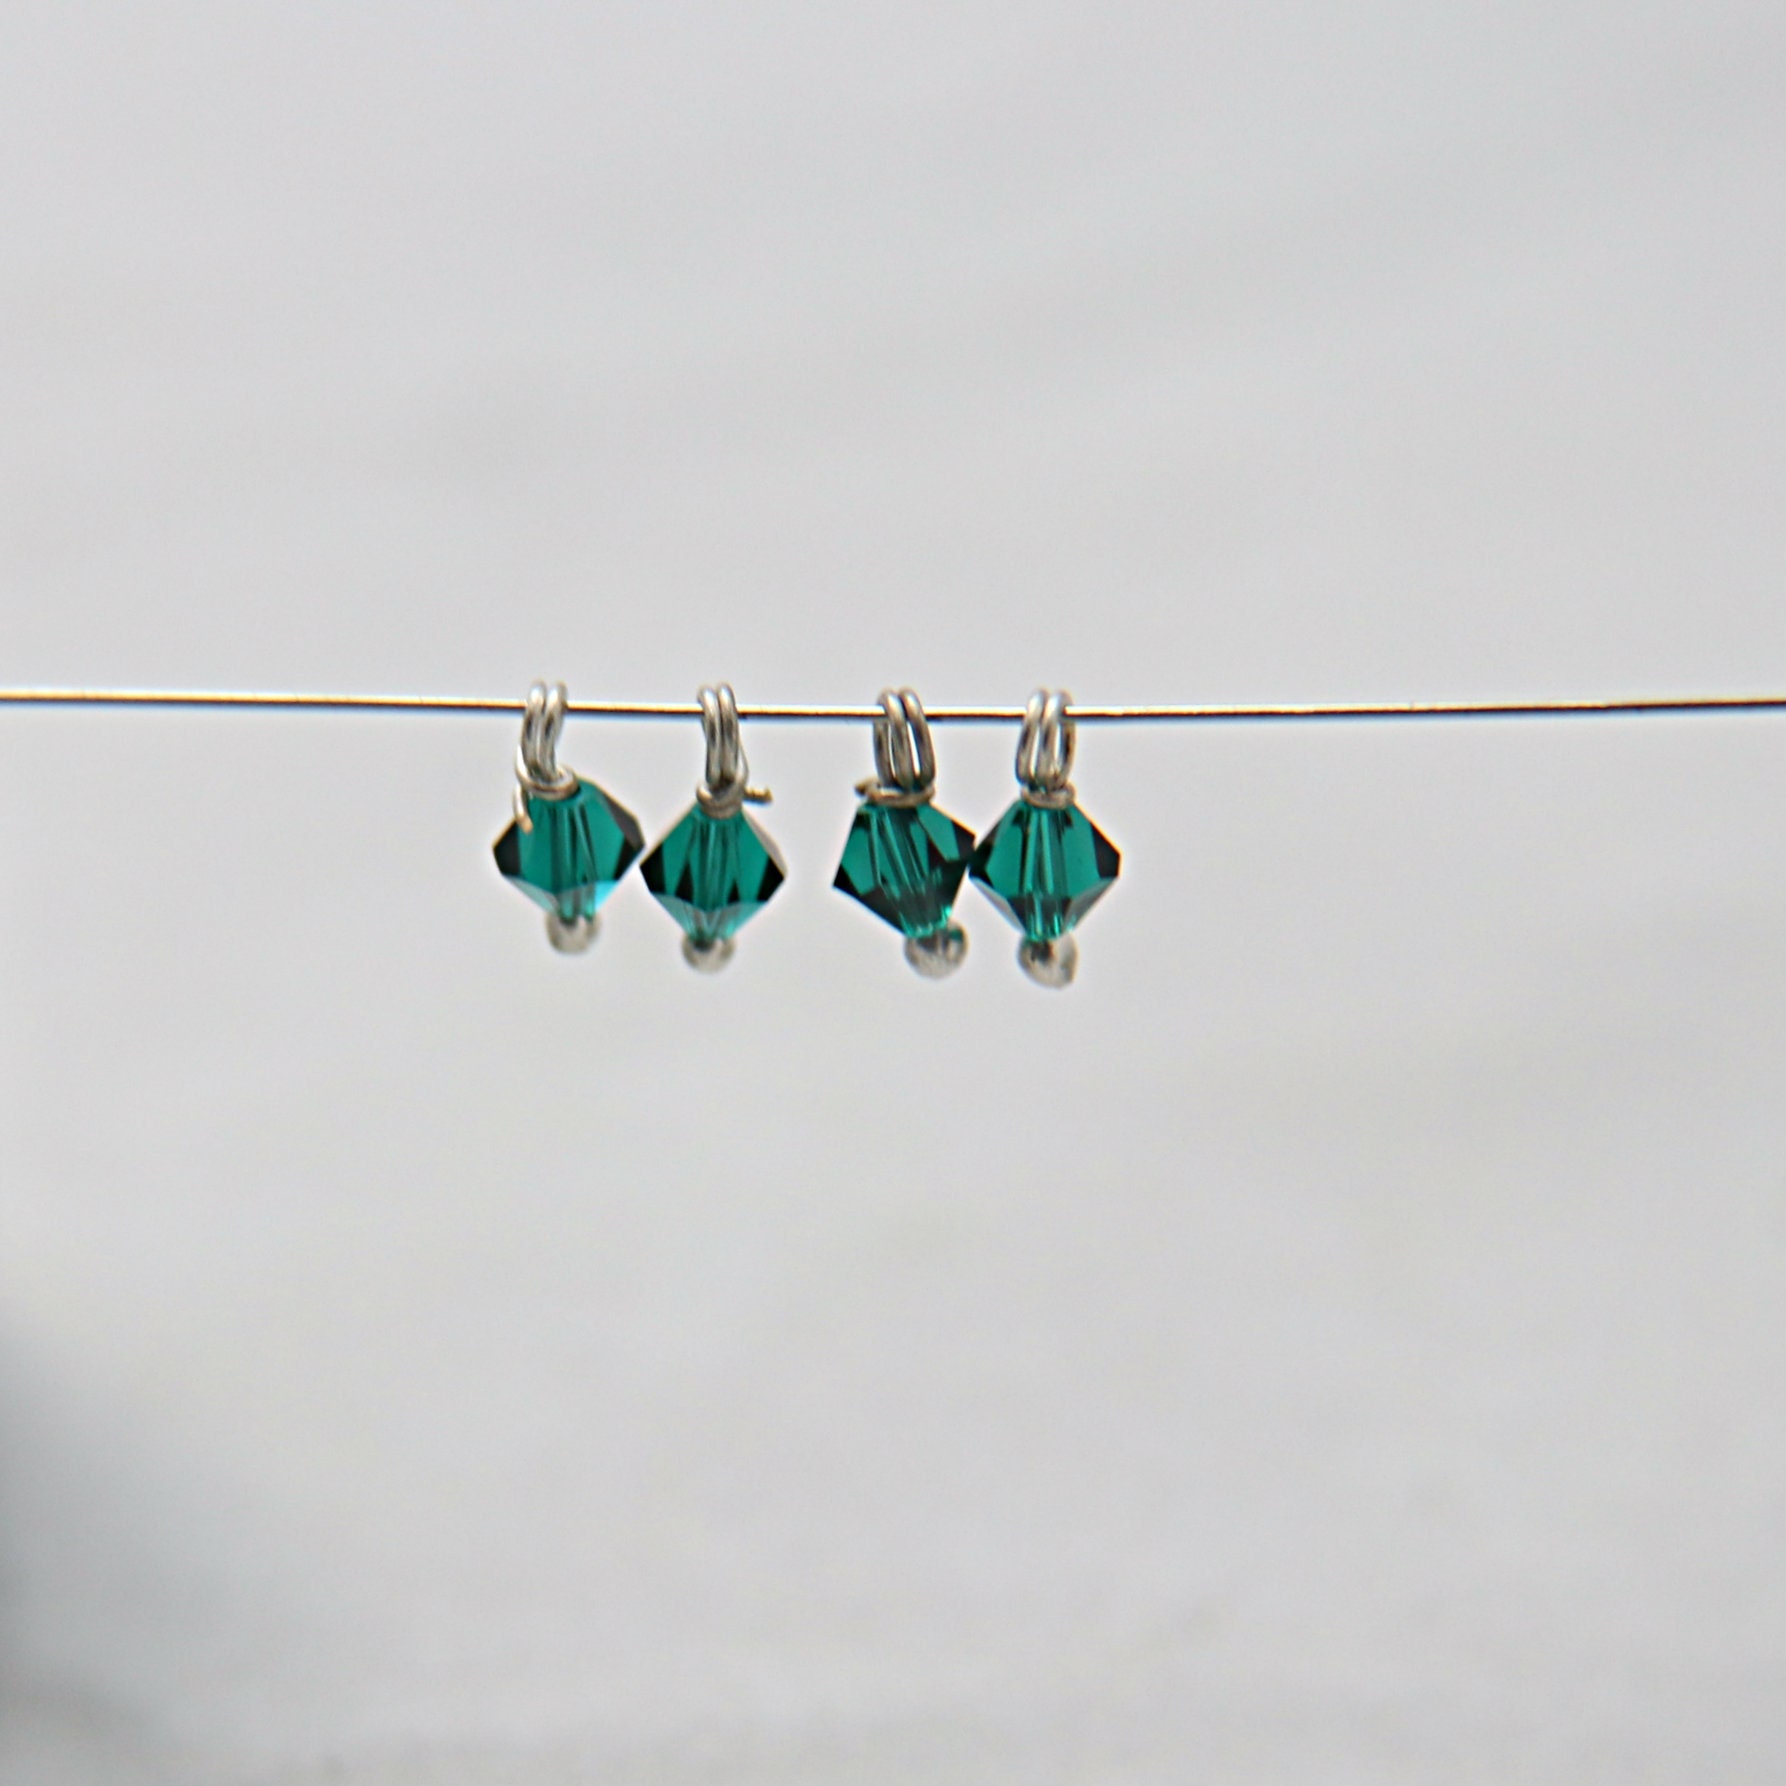 4mm Swarovski EMERALD crystal dangles in Sterling Silver wire wrapped-  charms- drops- jewelry making 72/144/432/1000Pieces jewelry finding